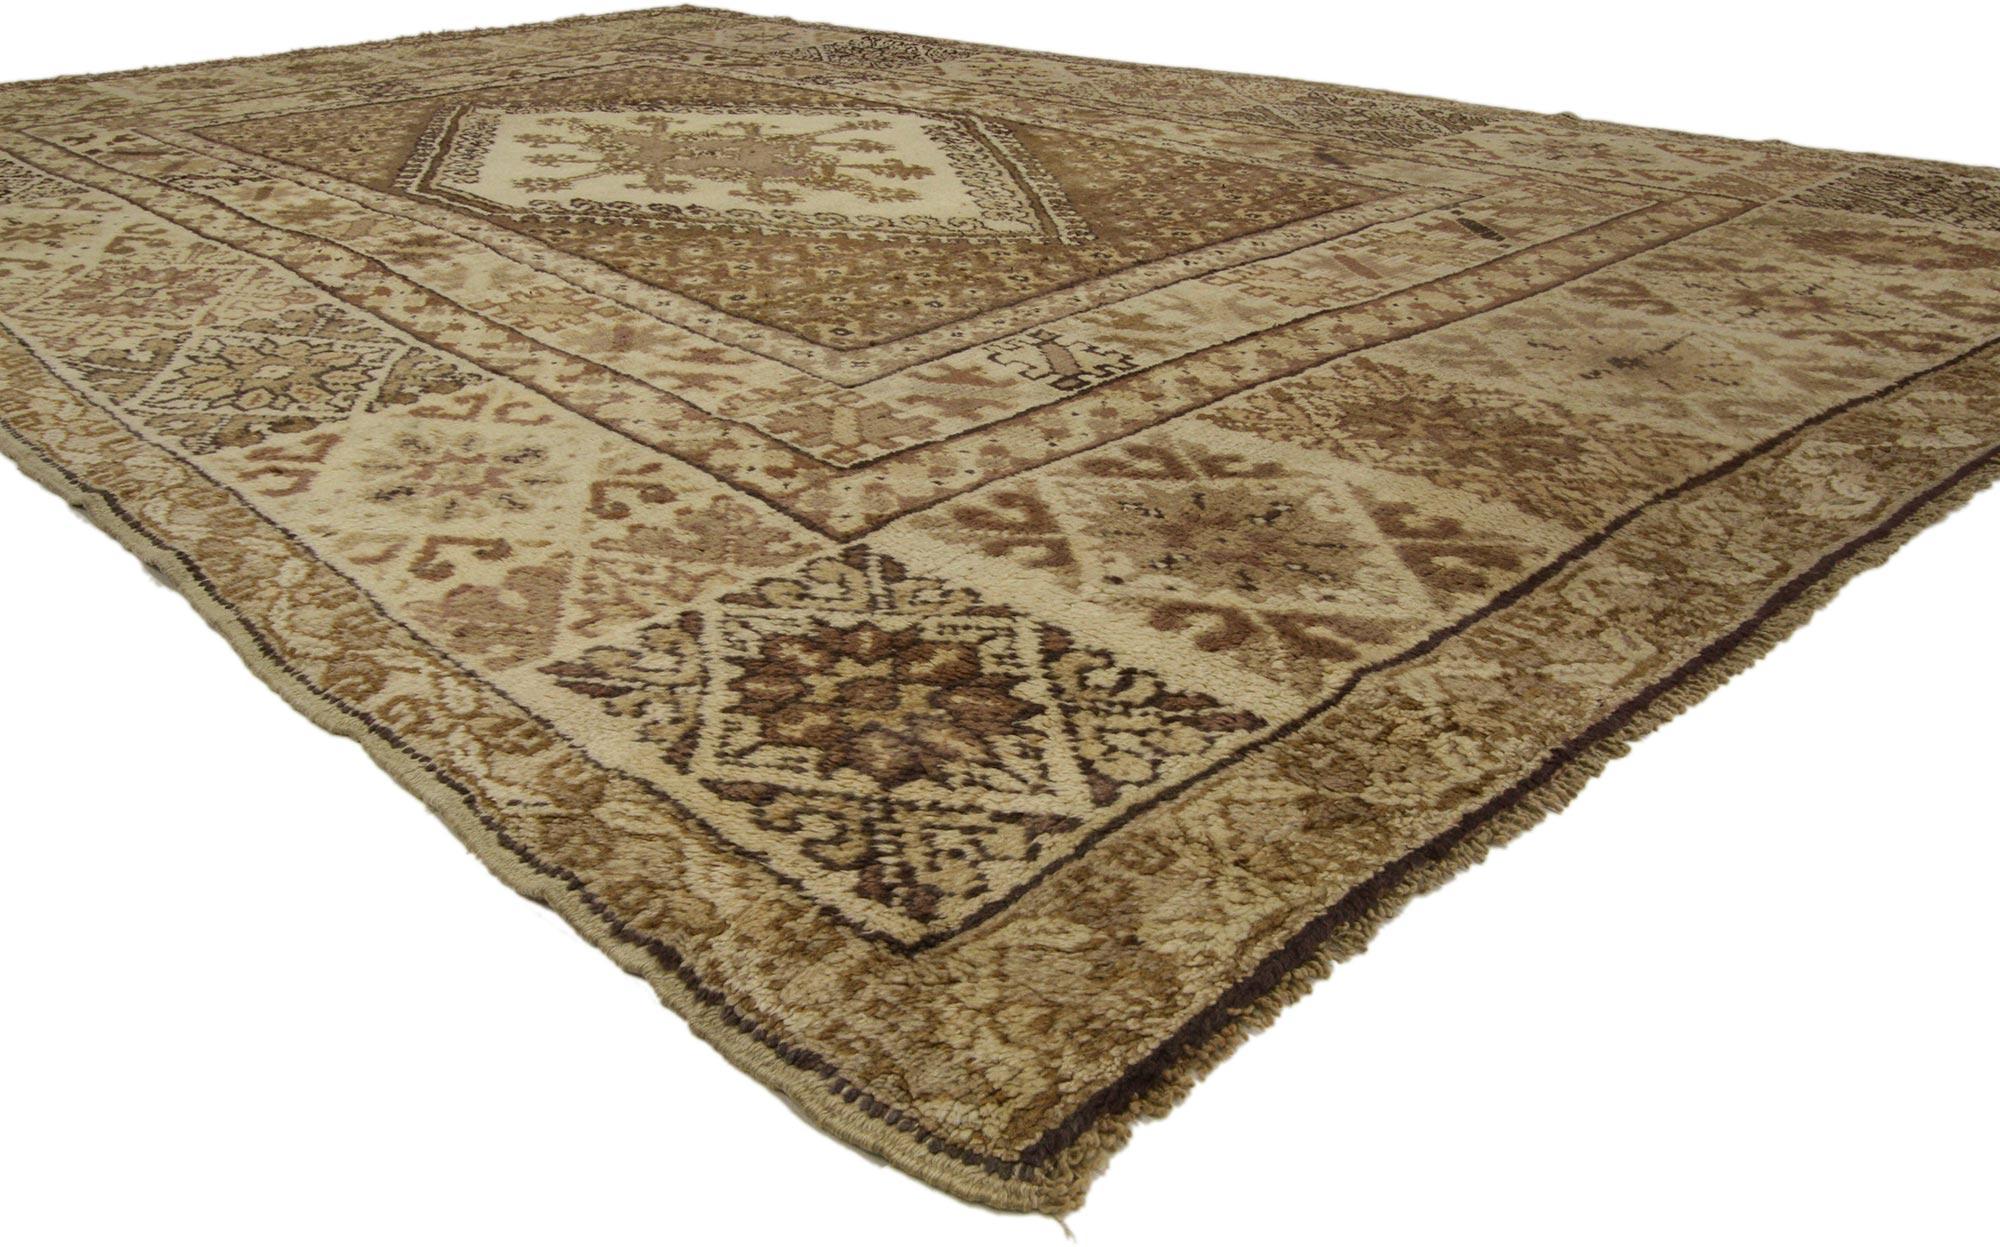 73992 Vintage Berber Rabat Moroccan Rug with Neutral Earth-Tone Colors 06'11 X 11'02. This hand-knotted wool vintage Rabat Moroccan rug beautifully highlights Anatolian and Transylvanian designs of the past. It features a large-scale hexagonal